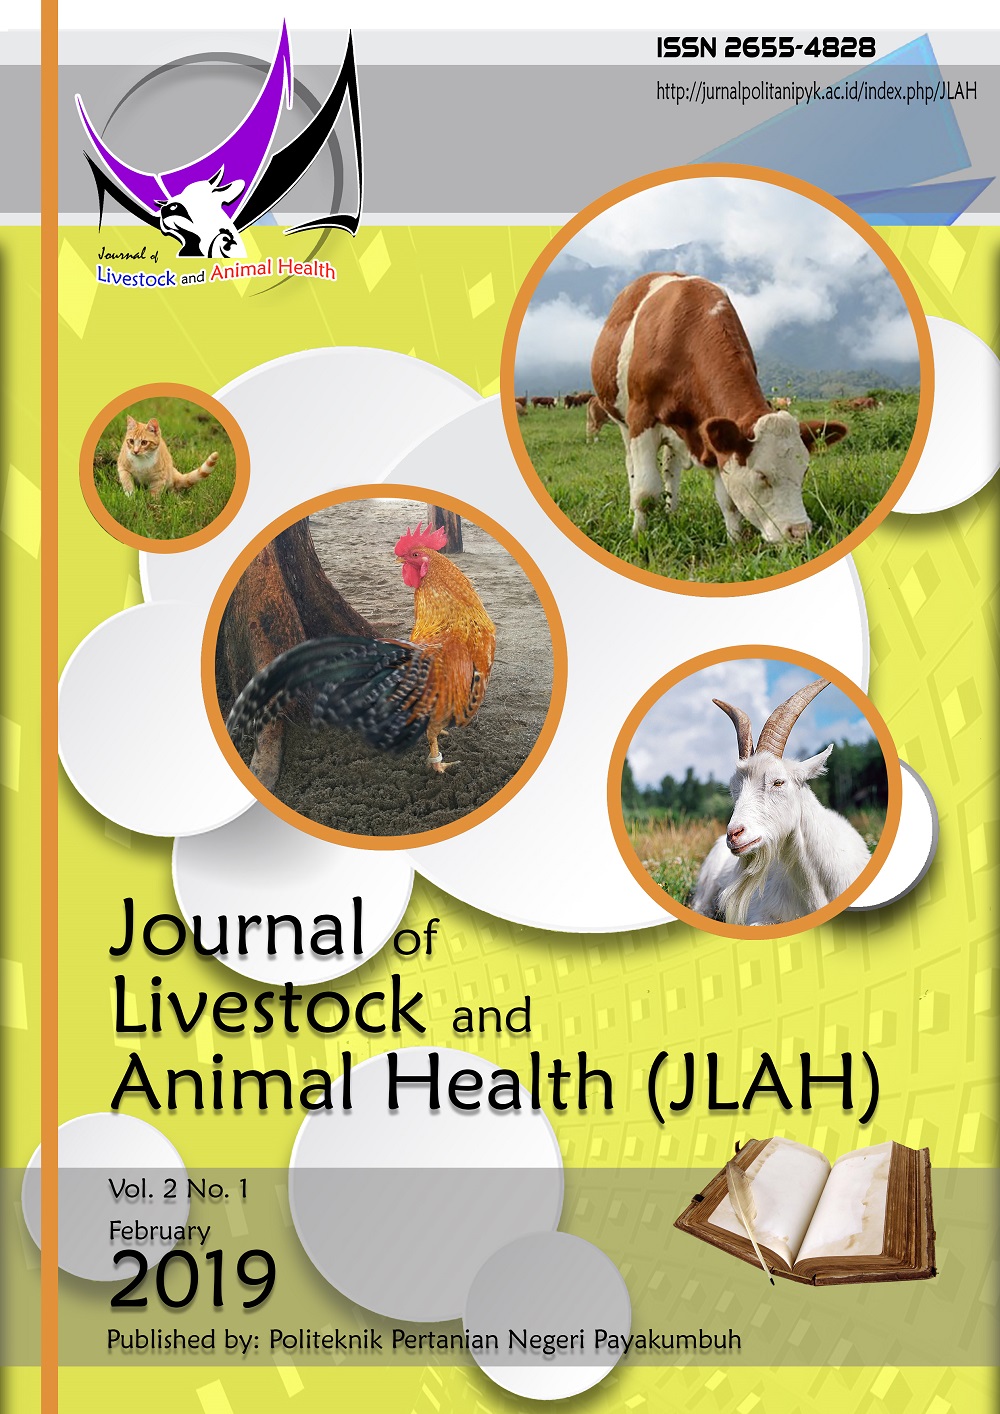 Archives | Journal of Livestock and Animal Health